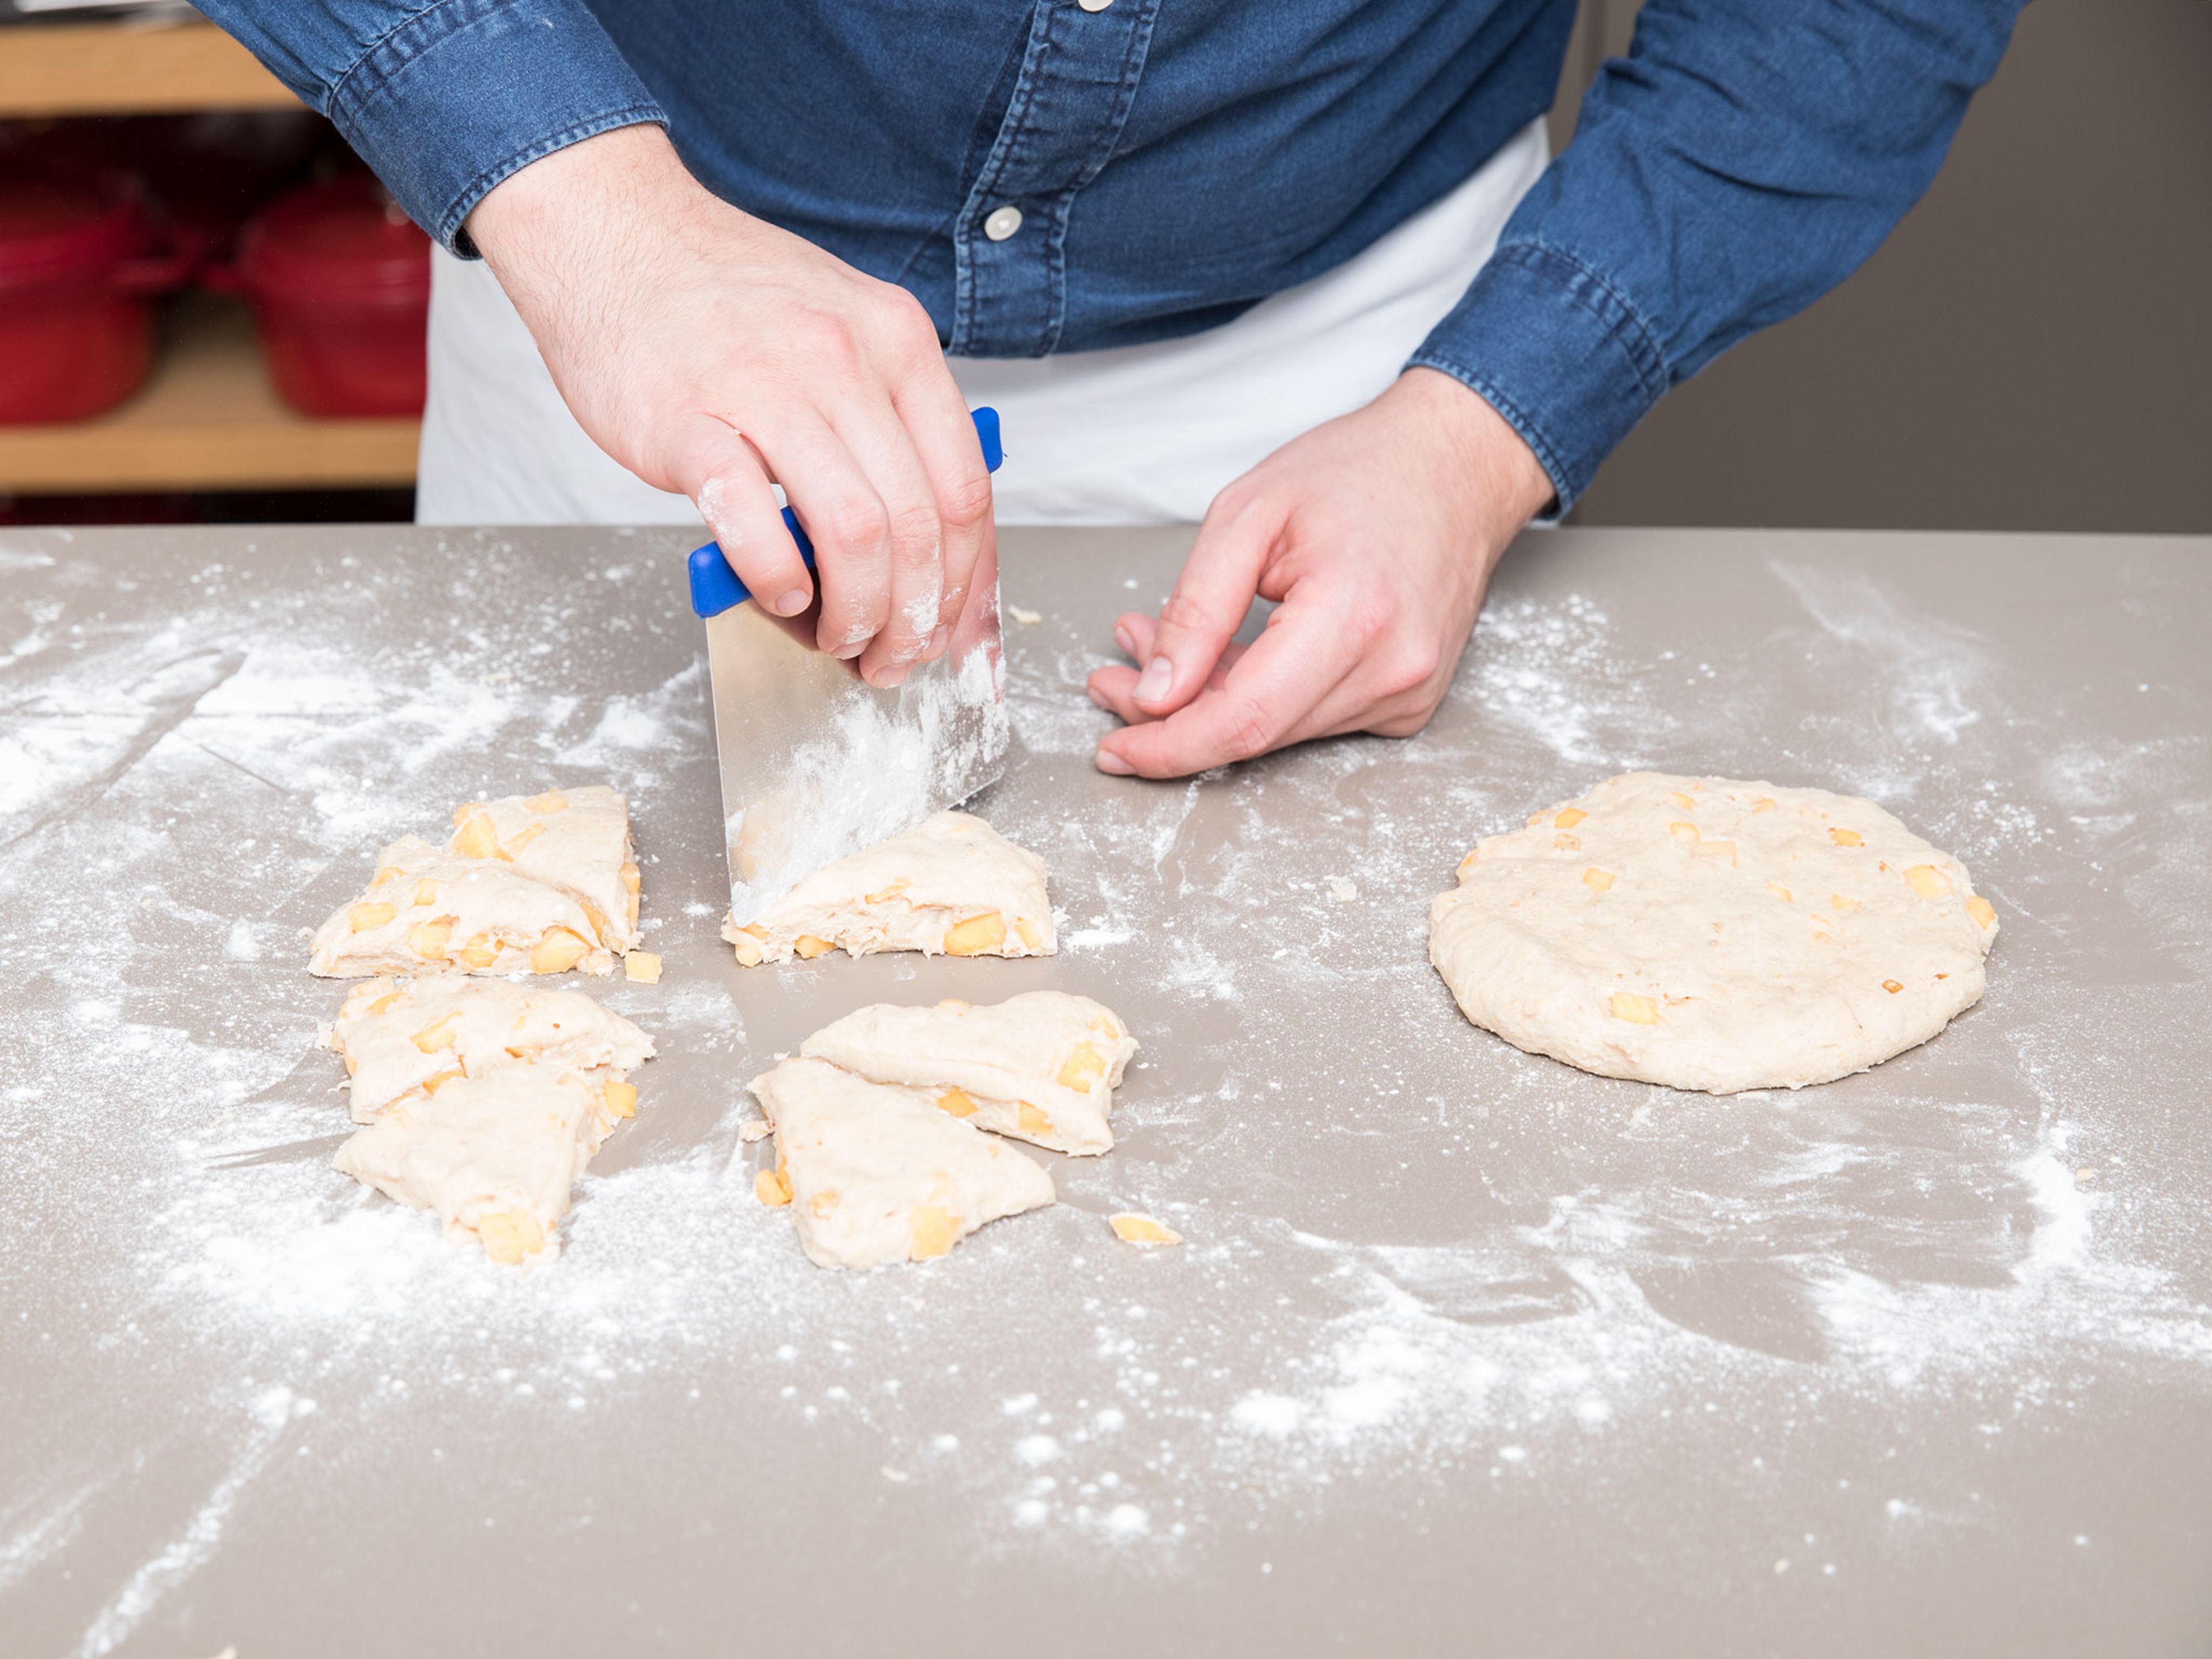 Flour a working surface. Halve the dough and form each half into a round disc. Divide each dough into eight scones and transfer them to a parchment paper-lined baking sheet.